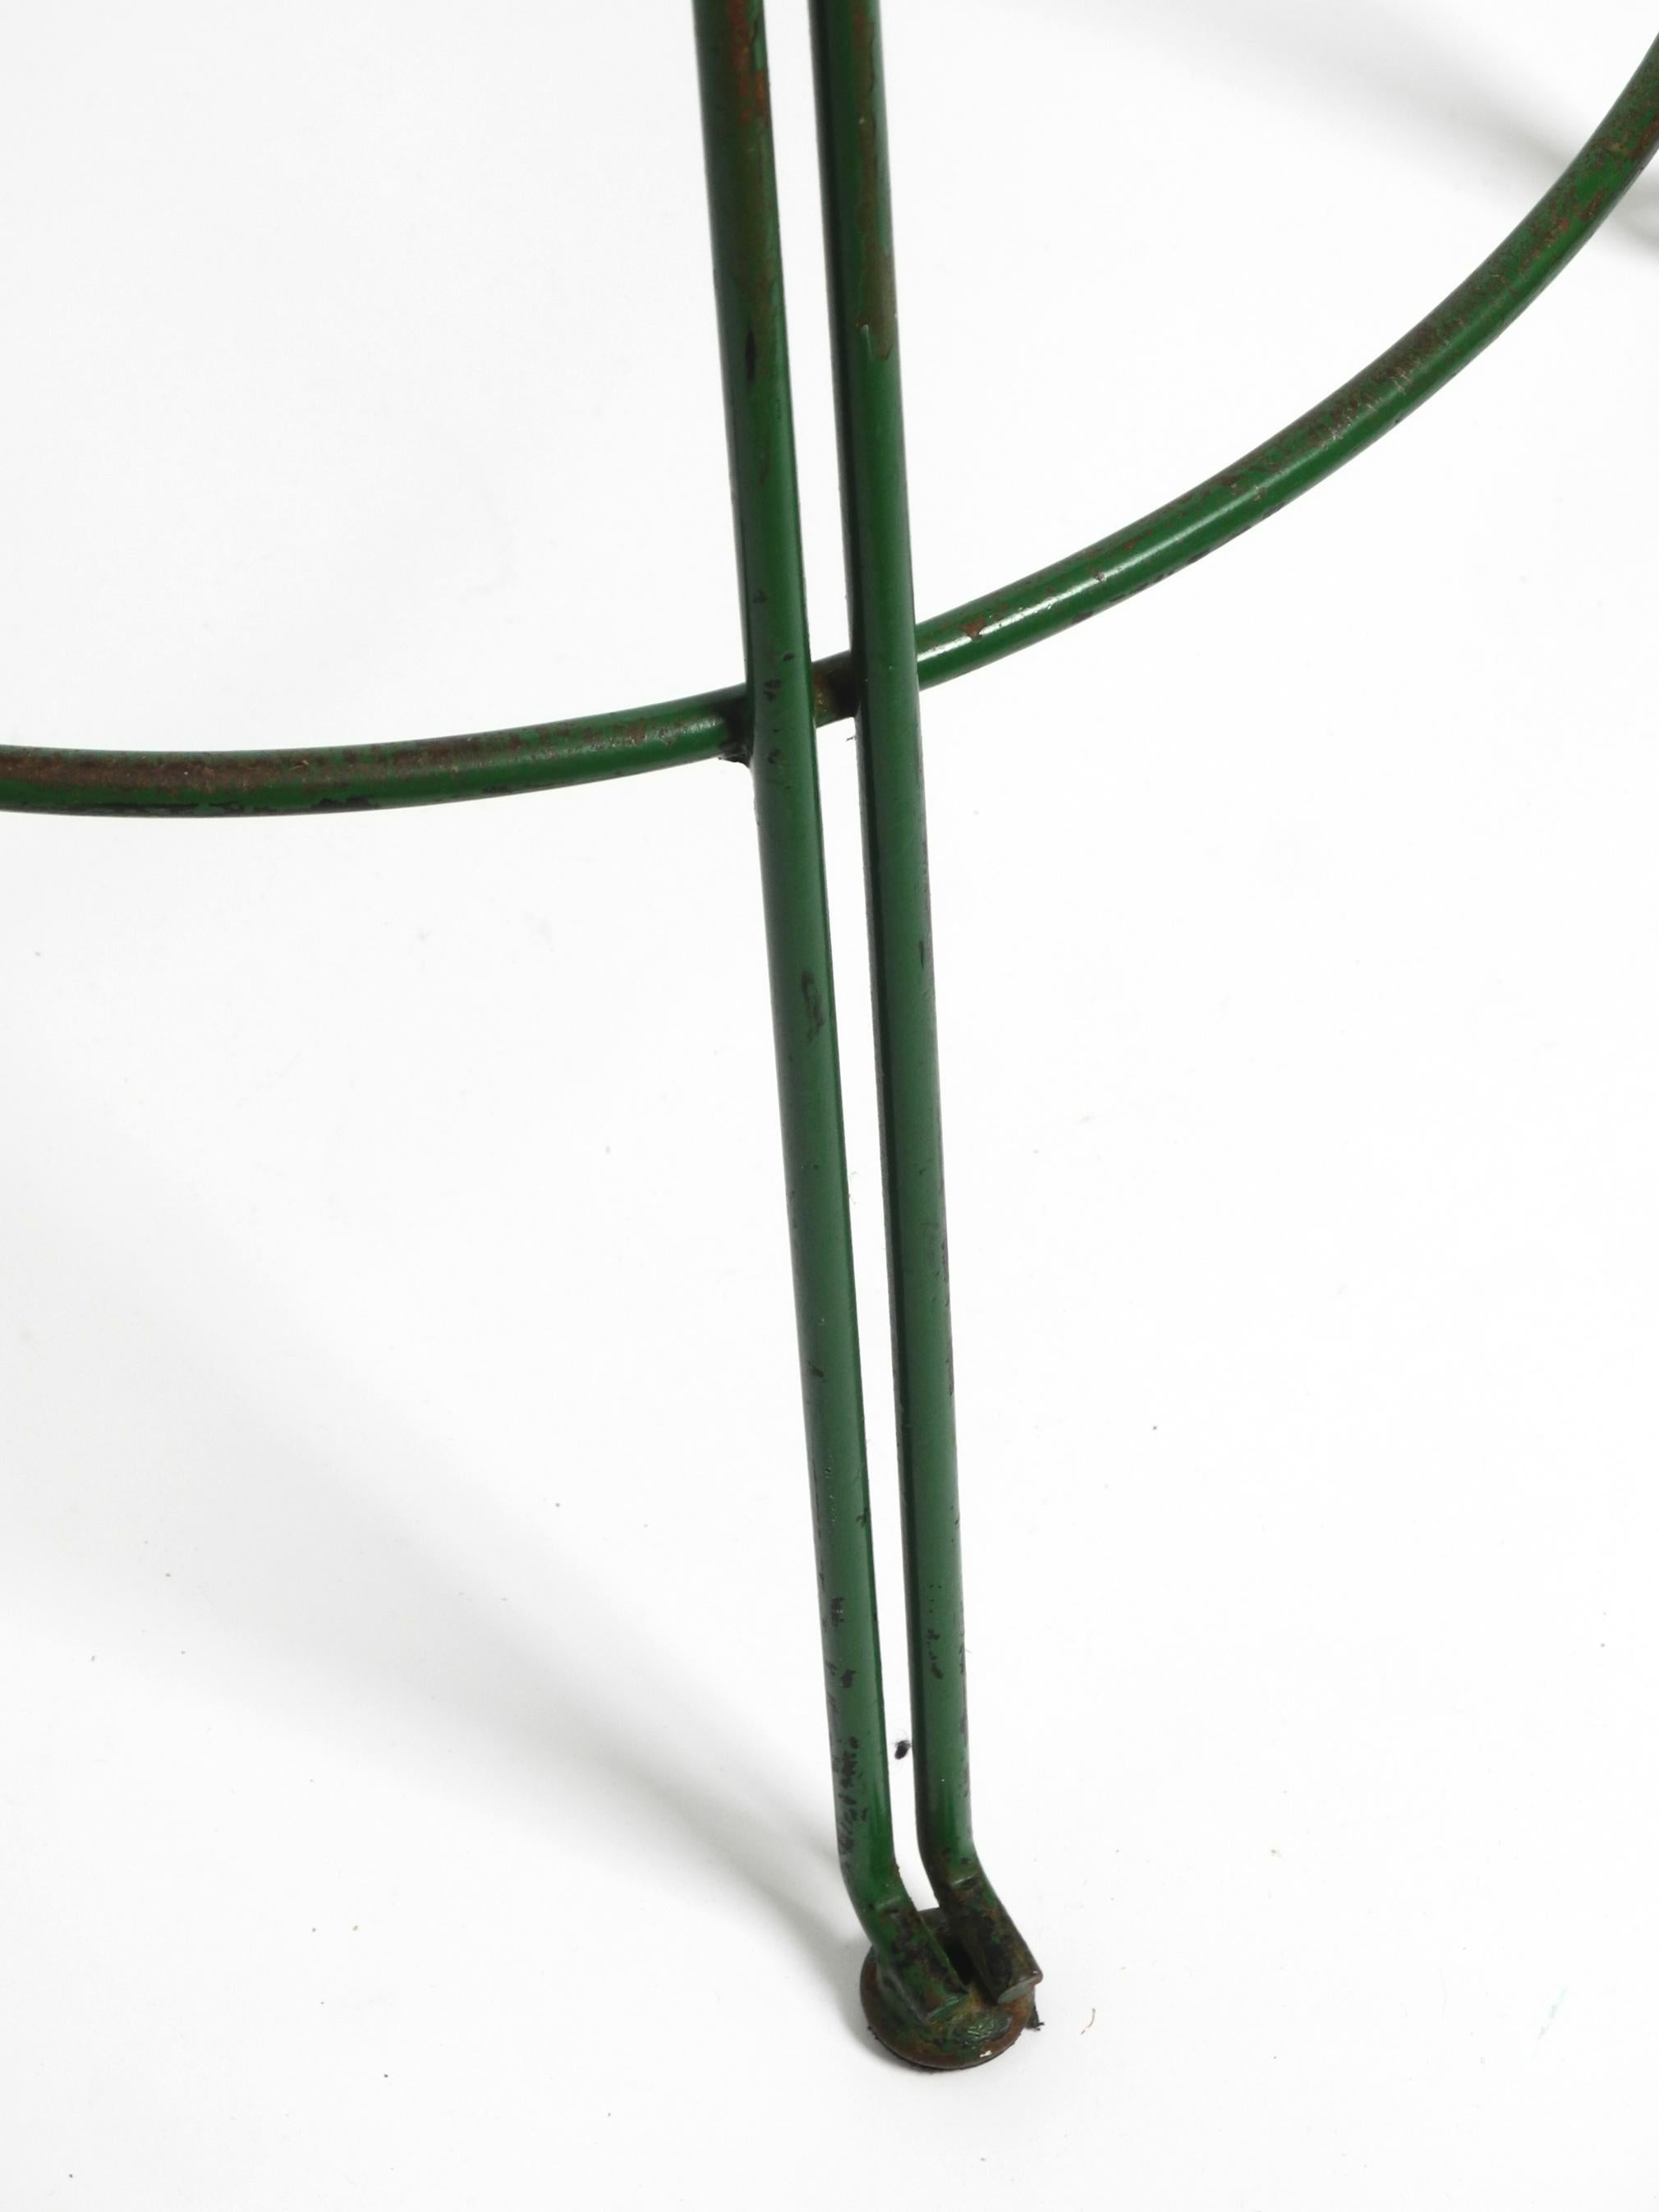 Italian 1960s bar stool made of green painted metal with perforated metal seat For Sale 4